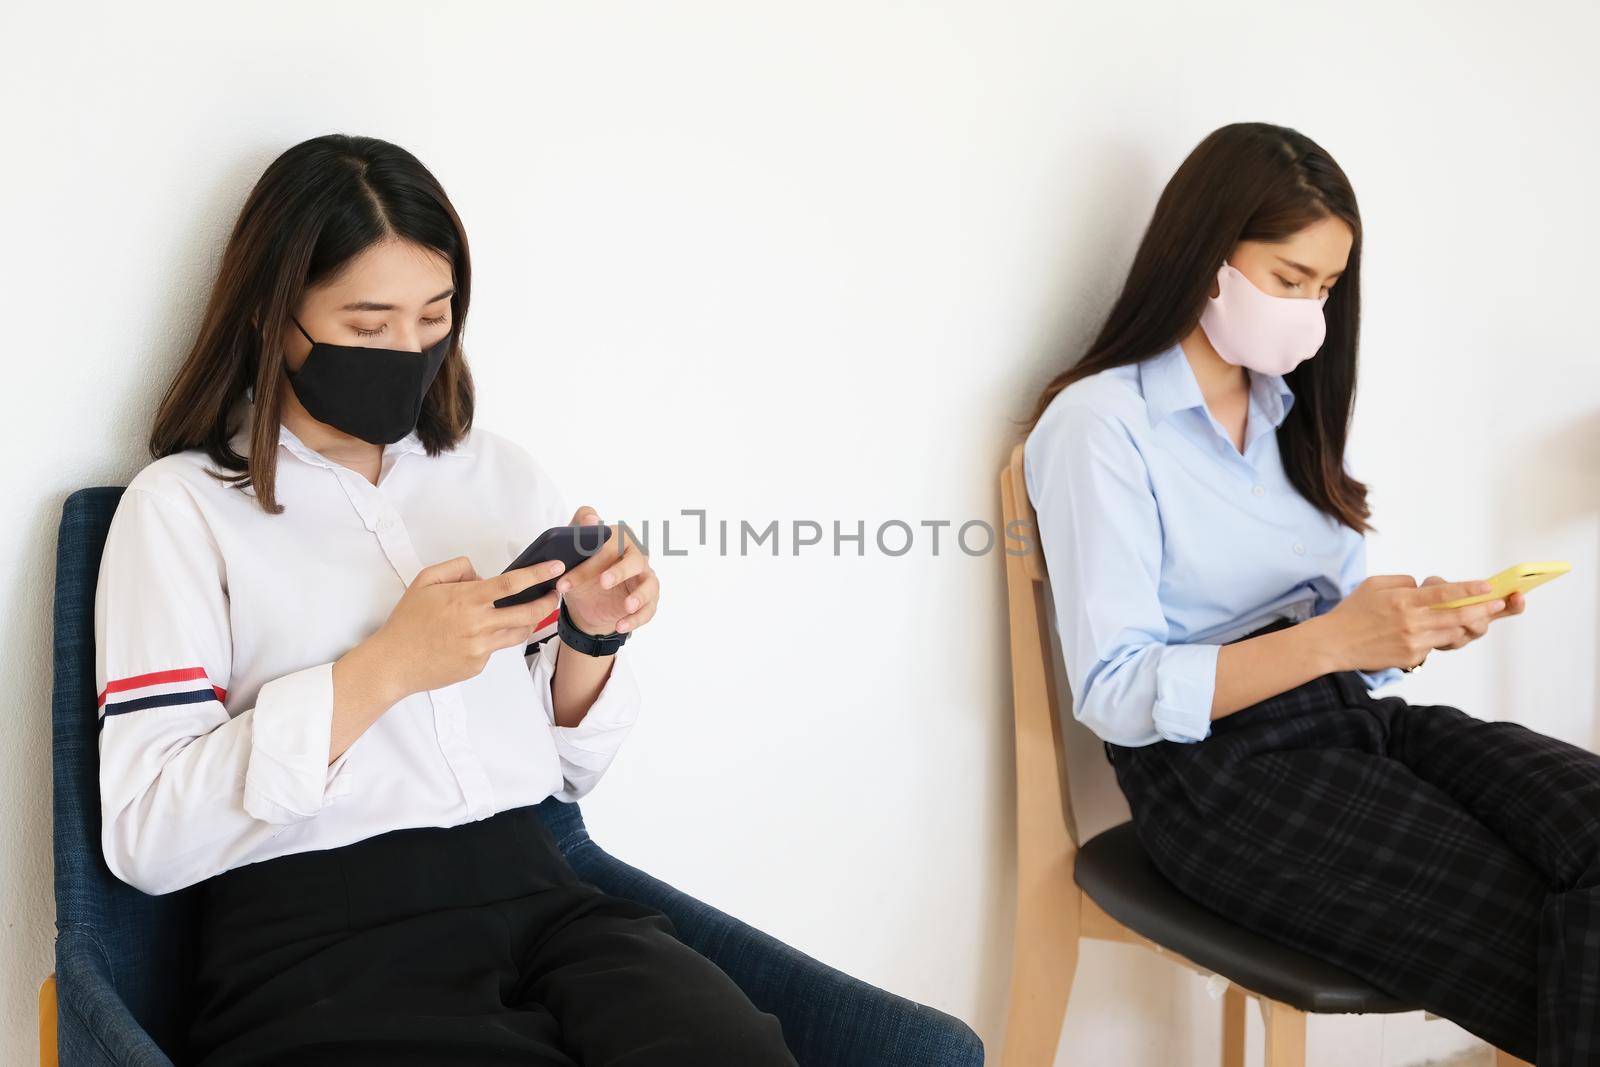 social distancing concept, Two women wearing masks and distancing while sitting on mobile phones following coronavirus social trend